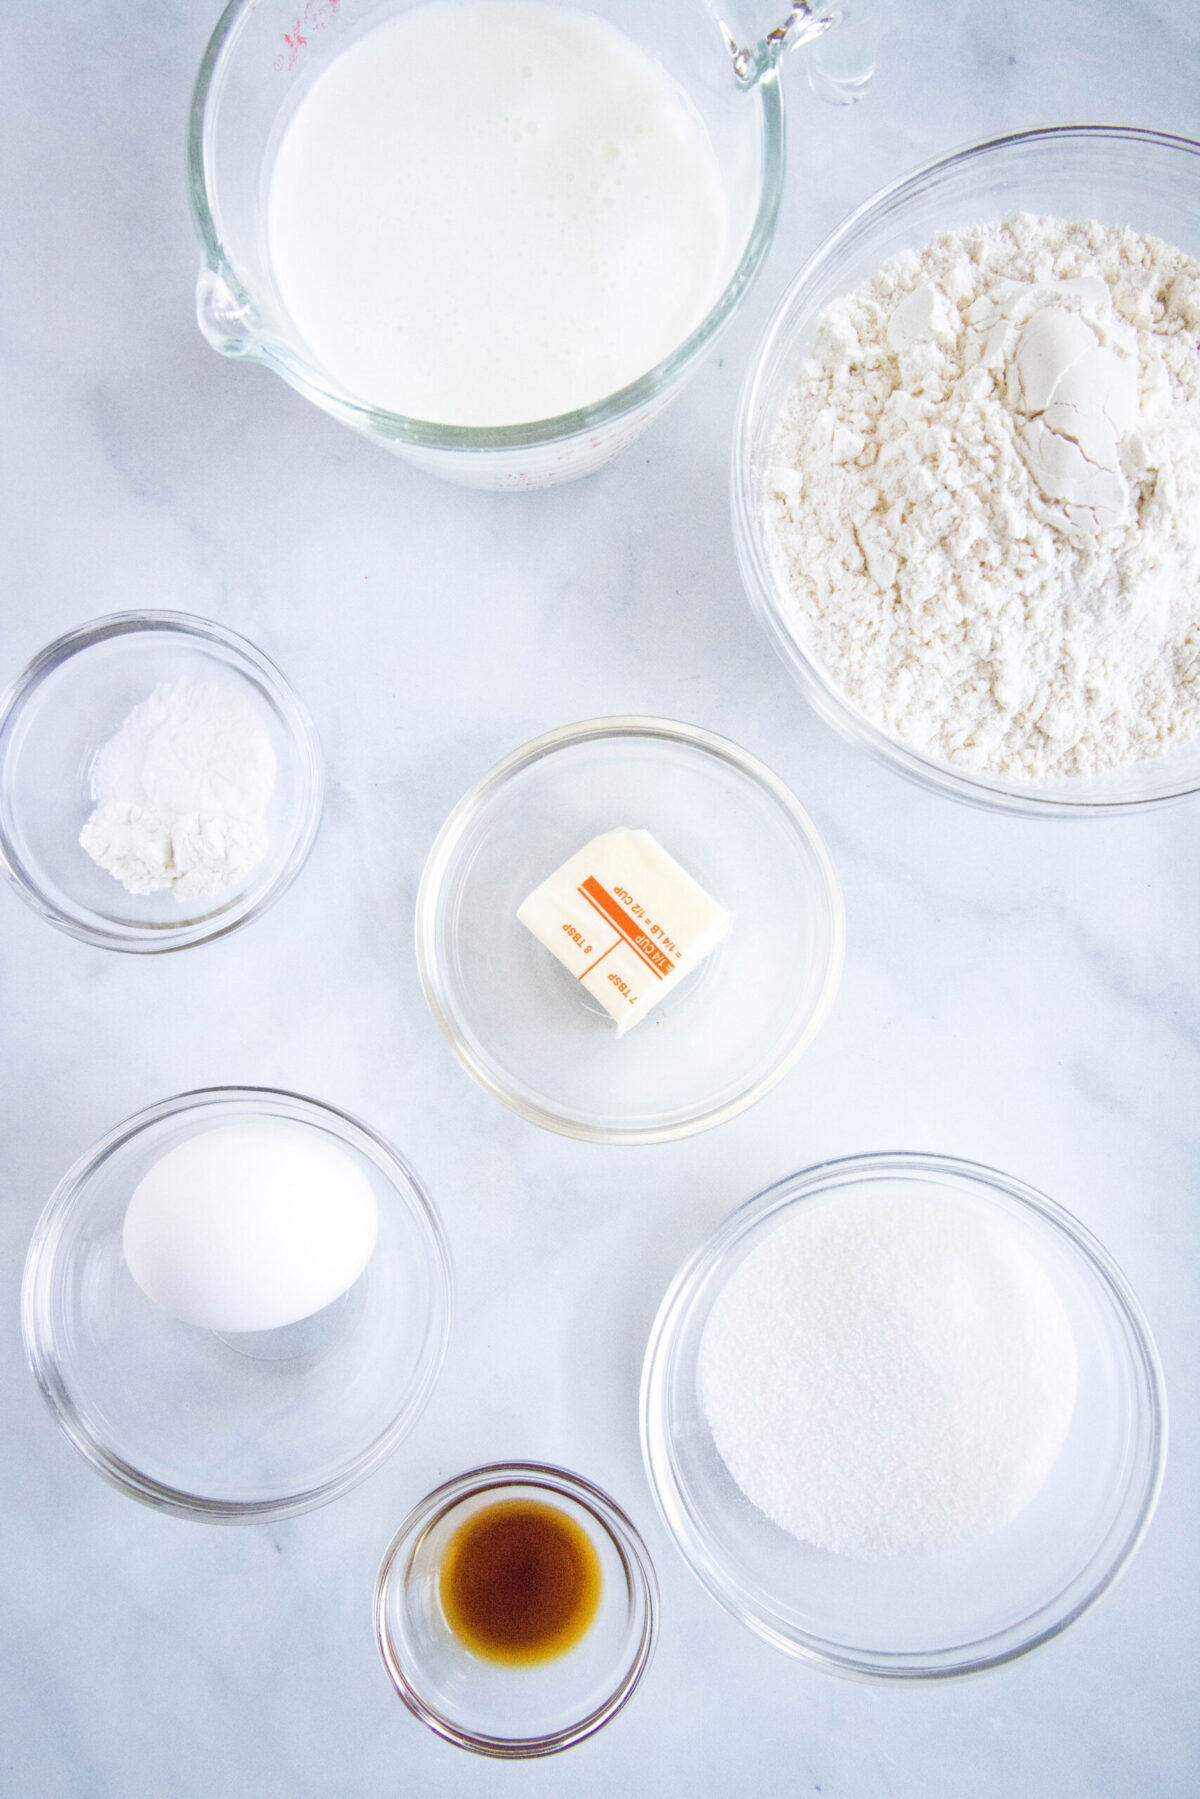 Overhead view of the ingredients needed for buttermilk pancakes: a bowl of flour, a pyrex of buttermilk, a bowl of sugar, a bowl of vanilla, a bowl of baking powder and soda, a cube of butter, and an egg.